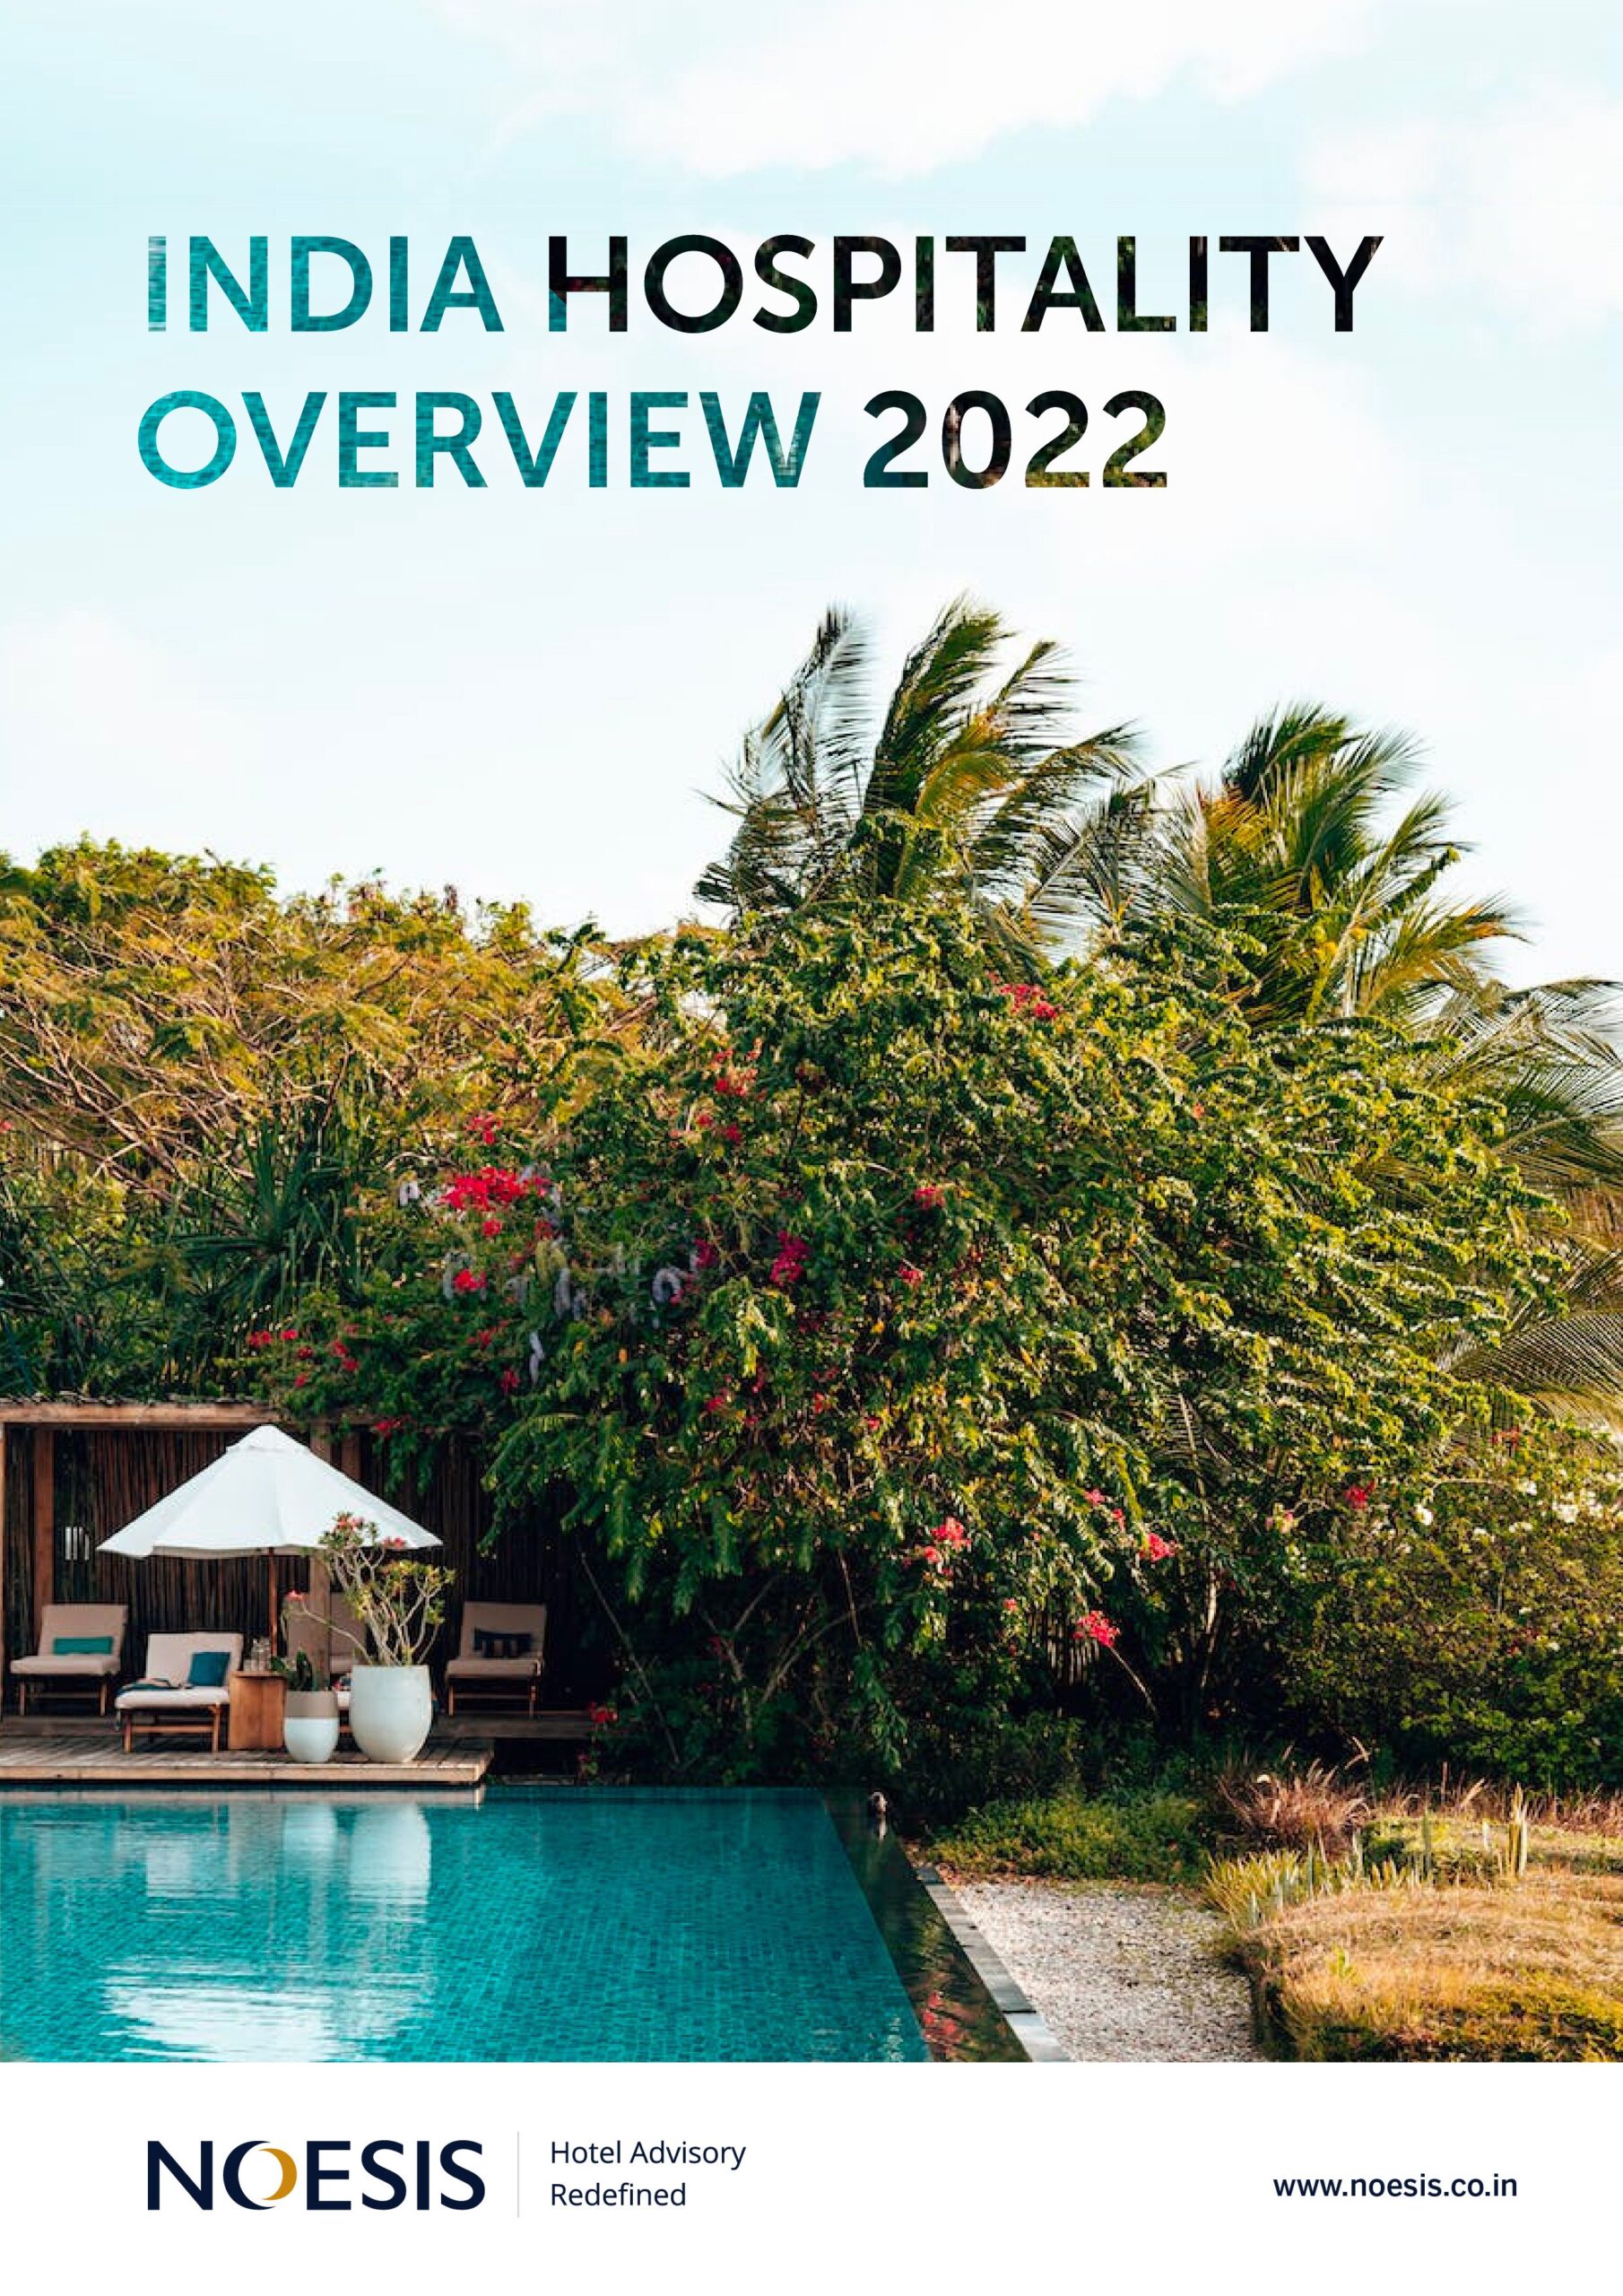 “India Hospitality Overview 2022” Reveals Strong Recovery and Positive Growth